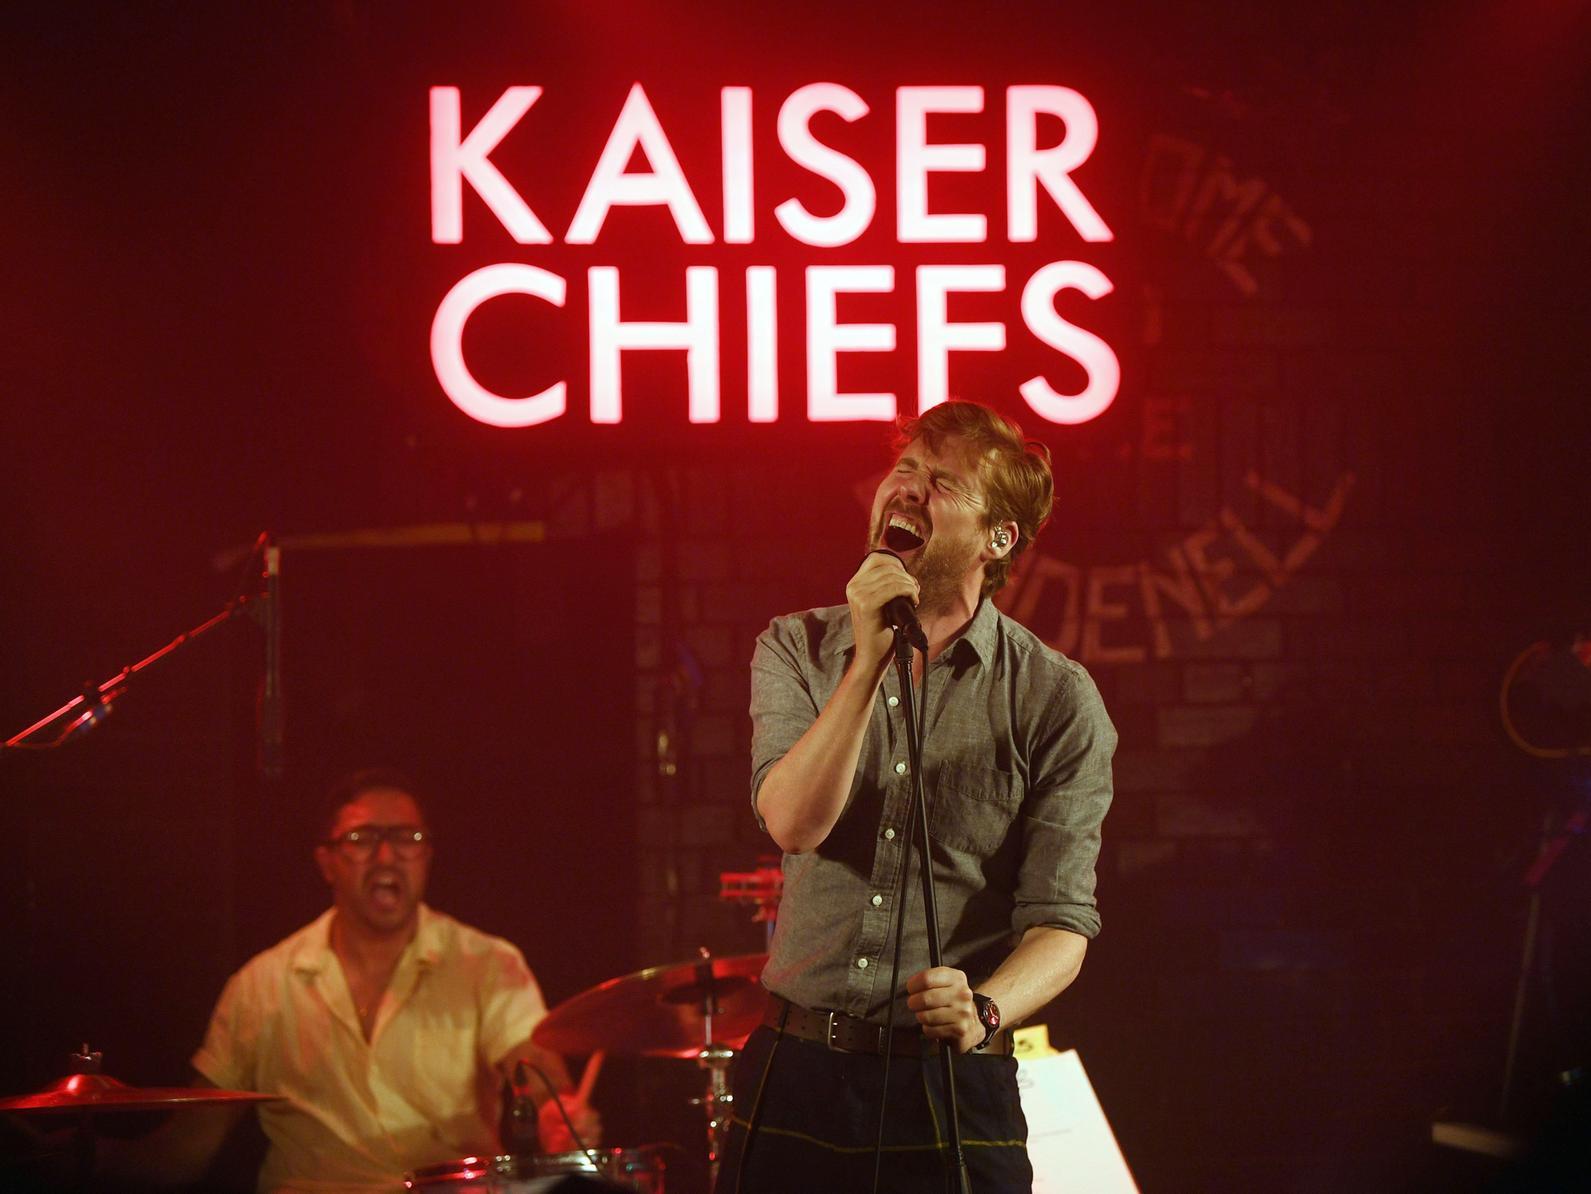 Leeds band the Kaiser Chiefs will be rocking the Piece Hall, Halifax in July. With another date added due to a sell out Saturday night show everyone can predict a riot at these highly anticipated events on July 4 and July 5.